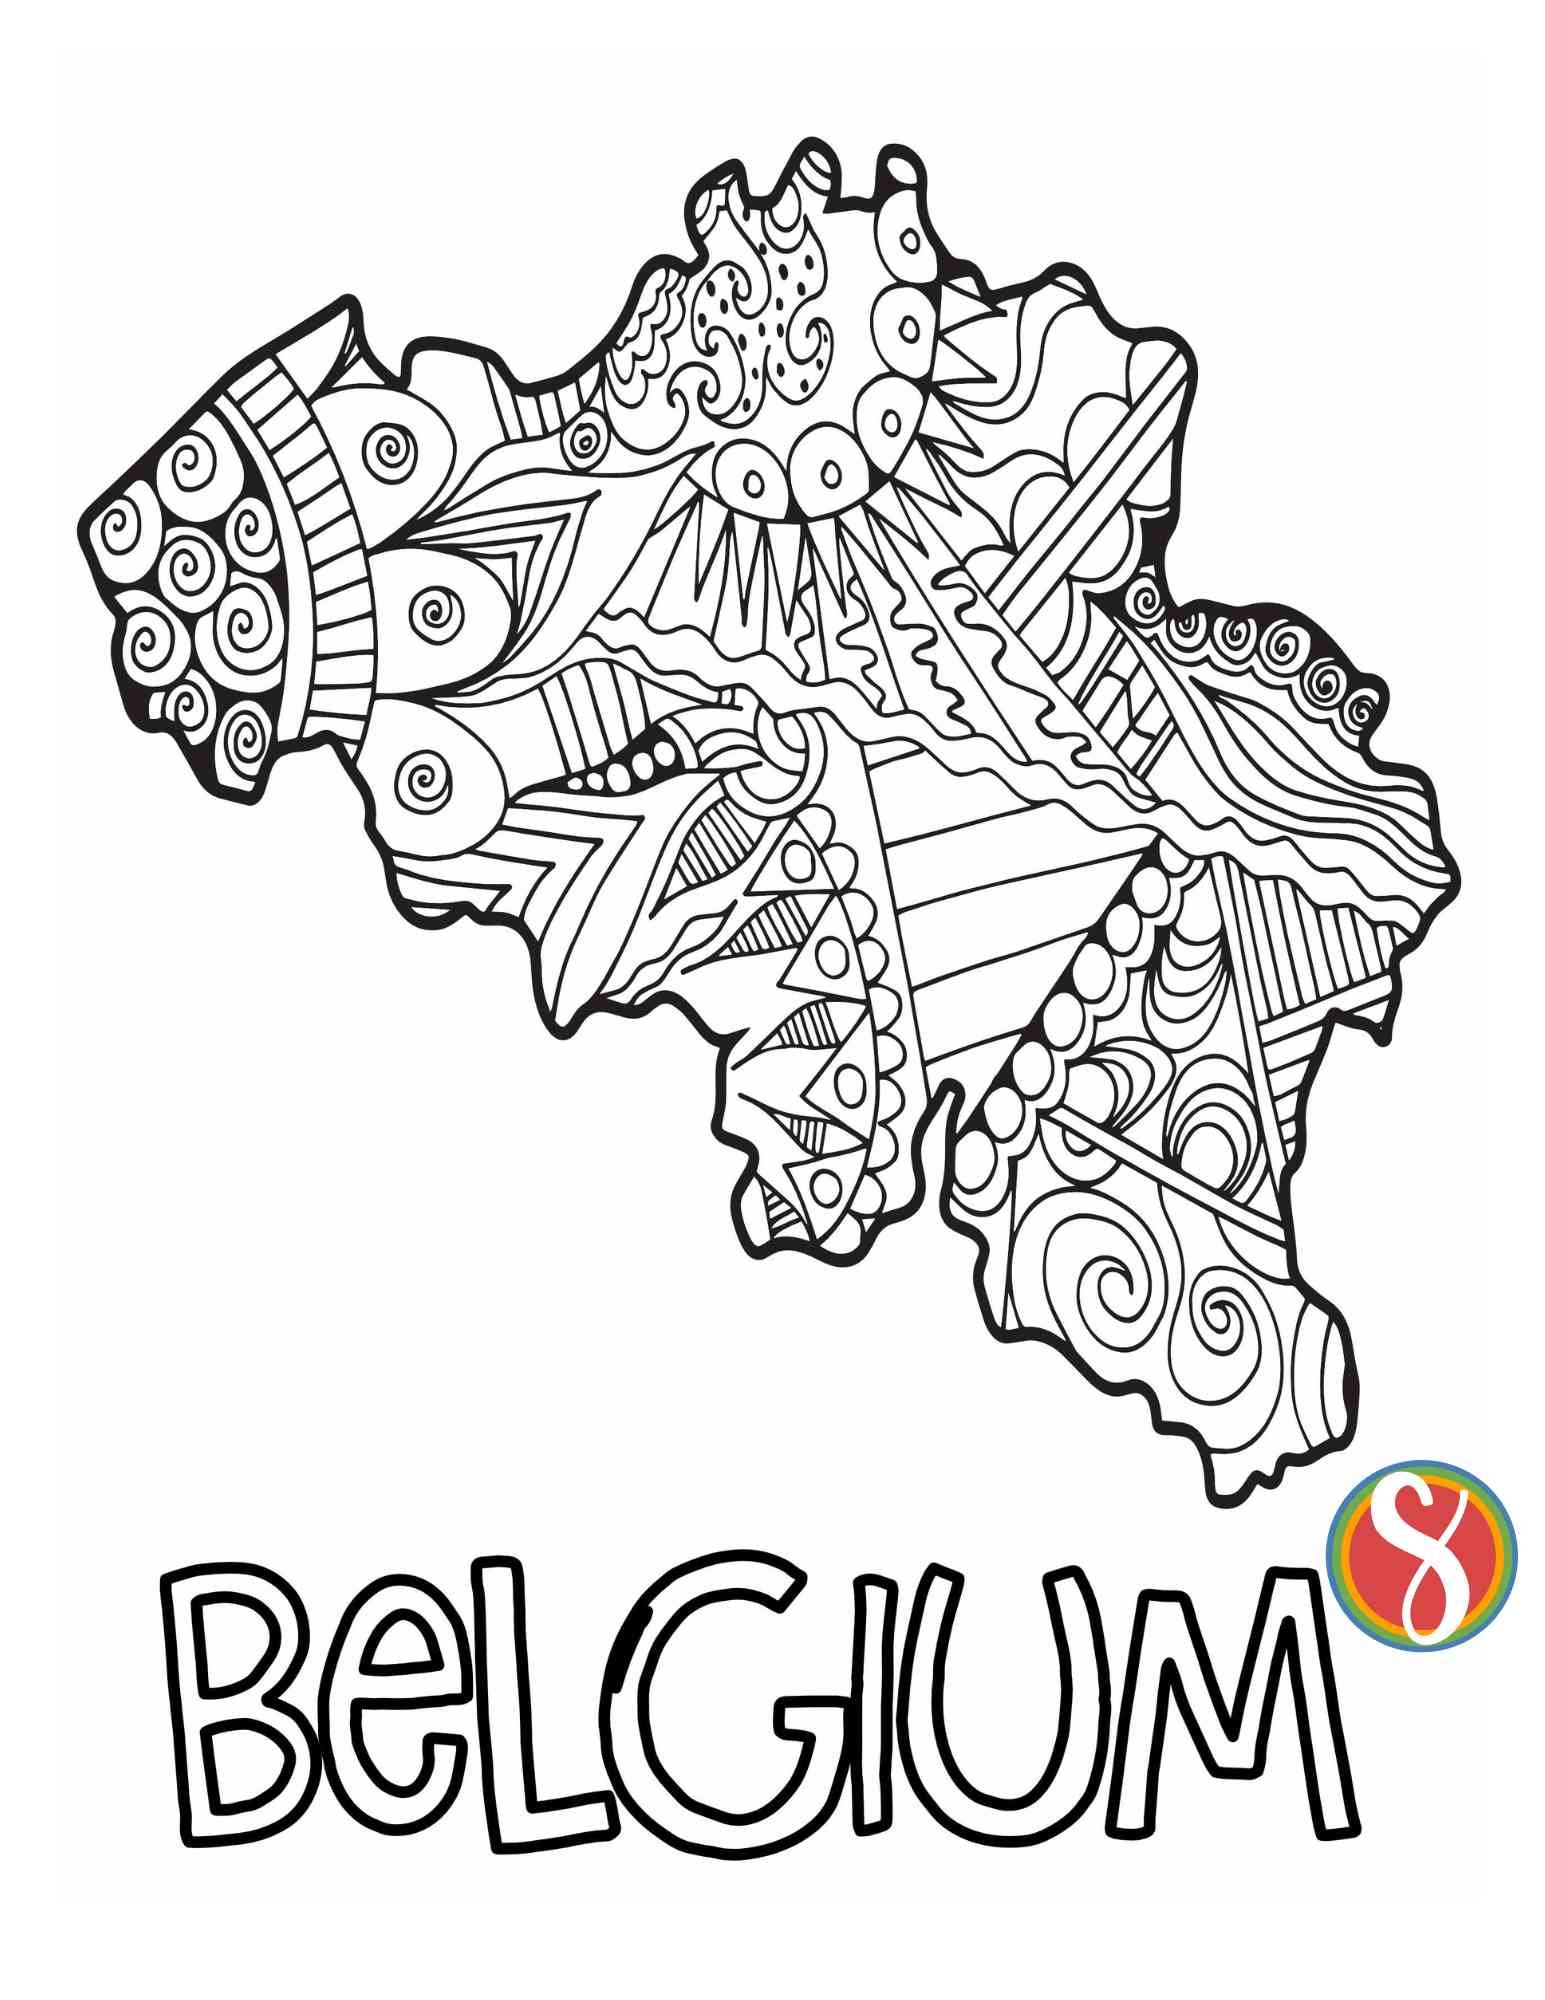 belgium coloring page, outline of map filled with with doodles